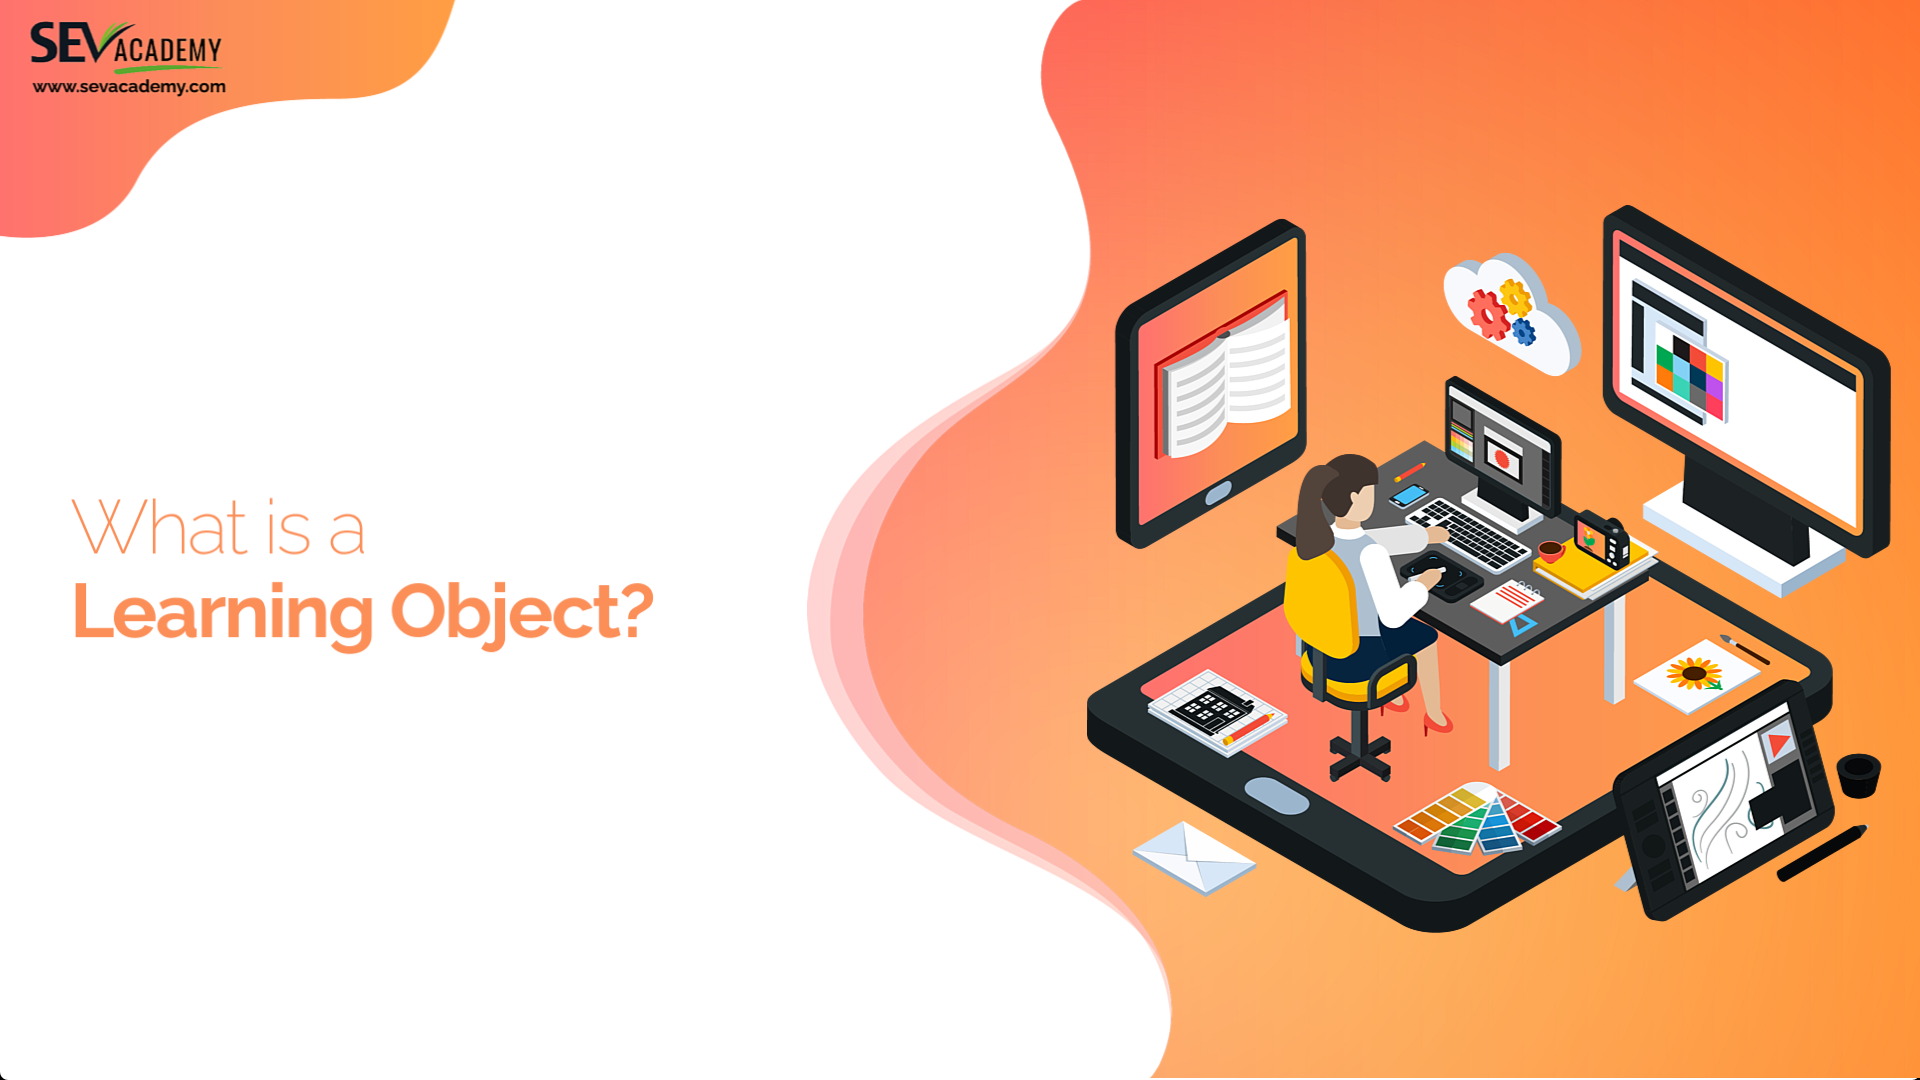 What is a Learning Object?